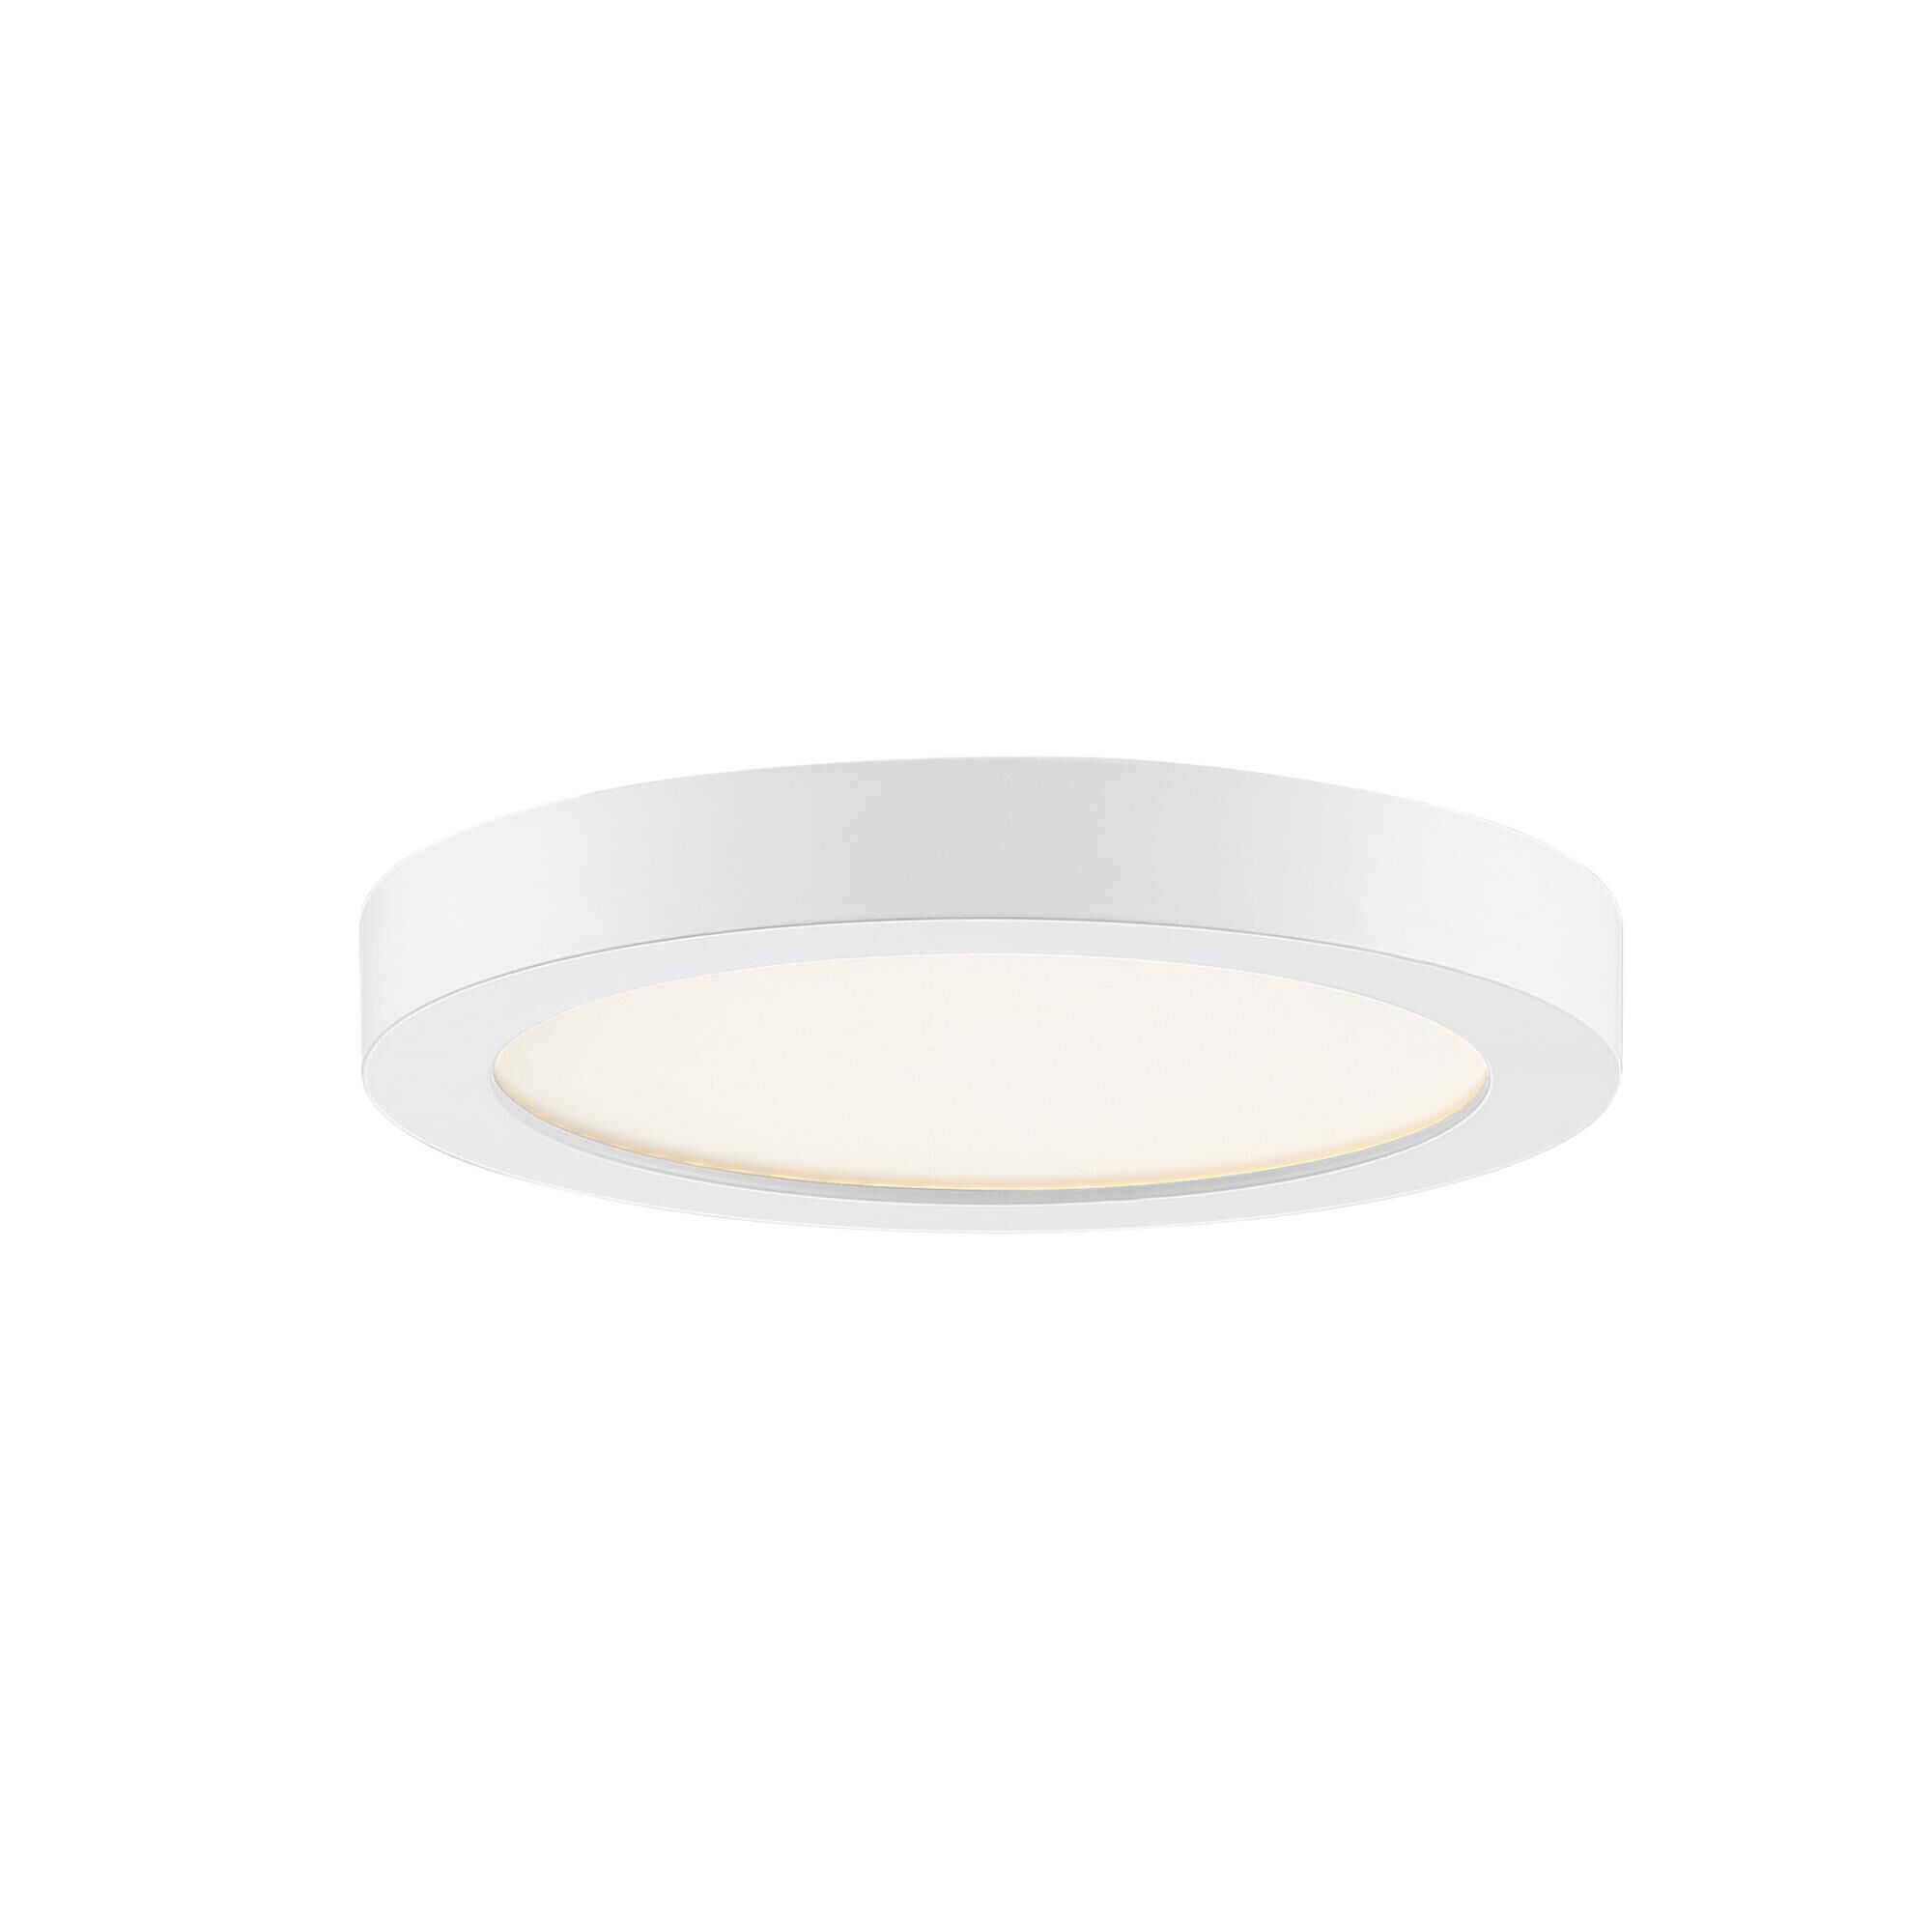 Photos - Chandelier / Lamp Quoizel Outskirts 7 Inch 1 Light LED Flush Mount Outskirts - OST1708W - Mo 